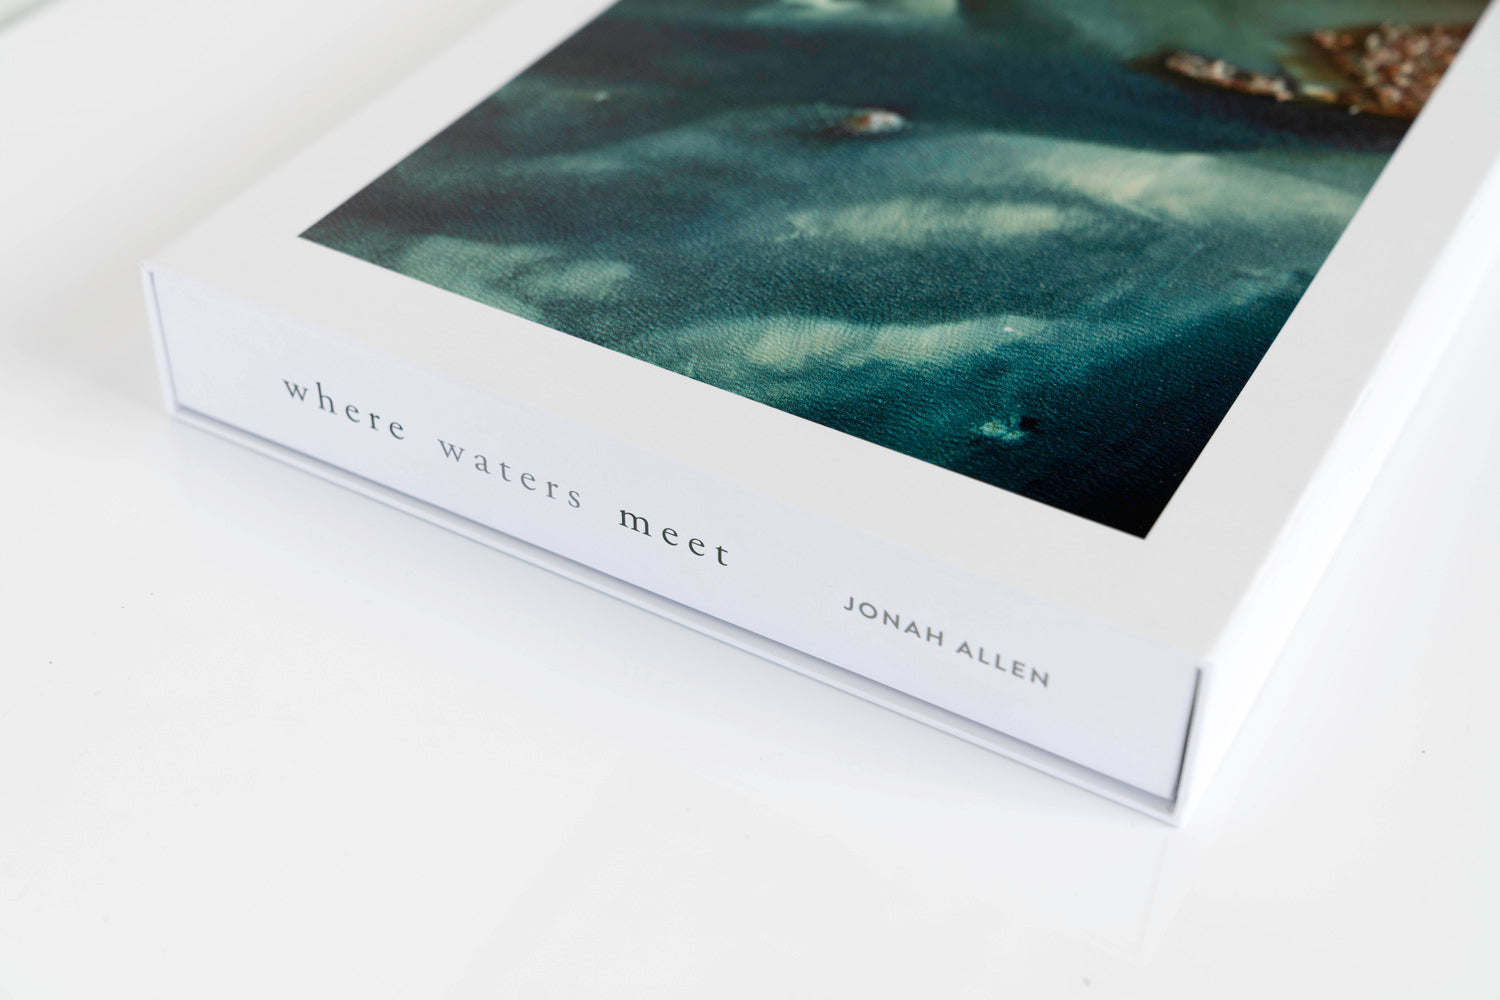 Where Waters Meet - Limited Edition + 16x24" Piece + 4 Course Dinner at Gallery